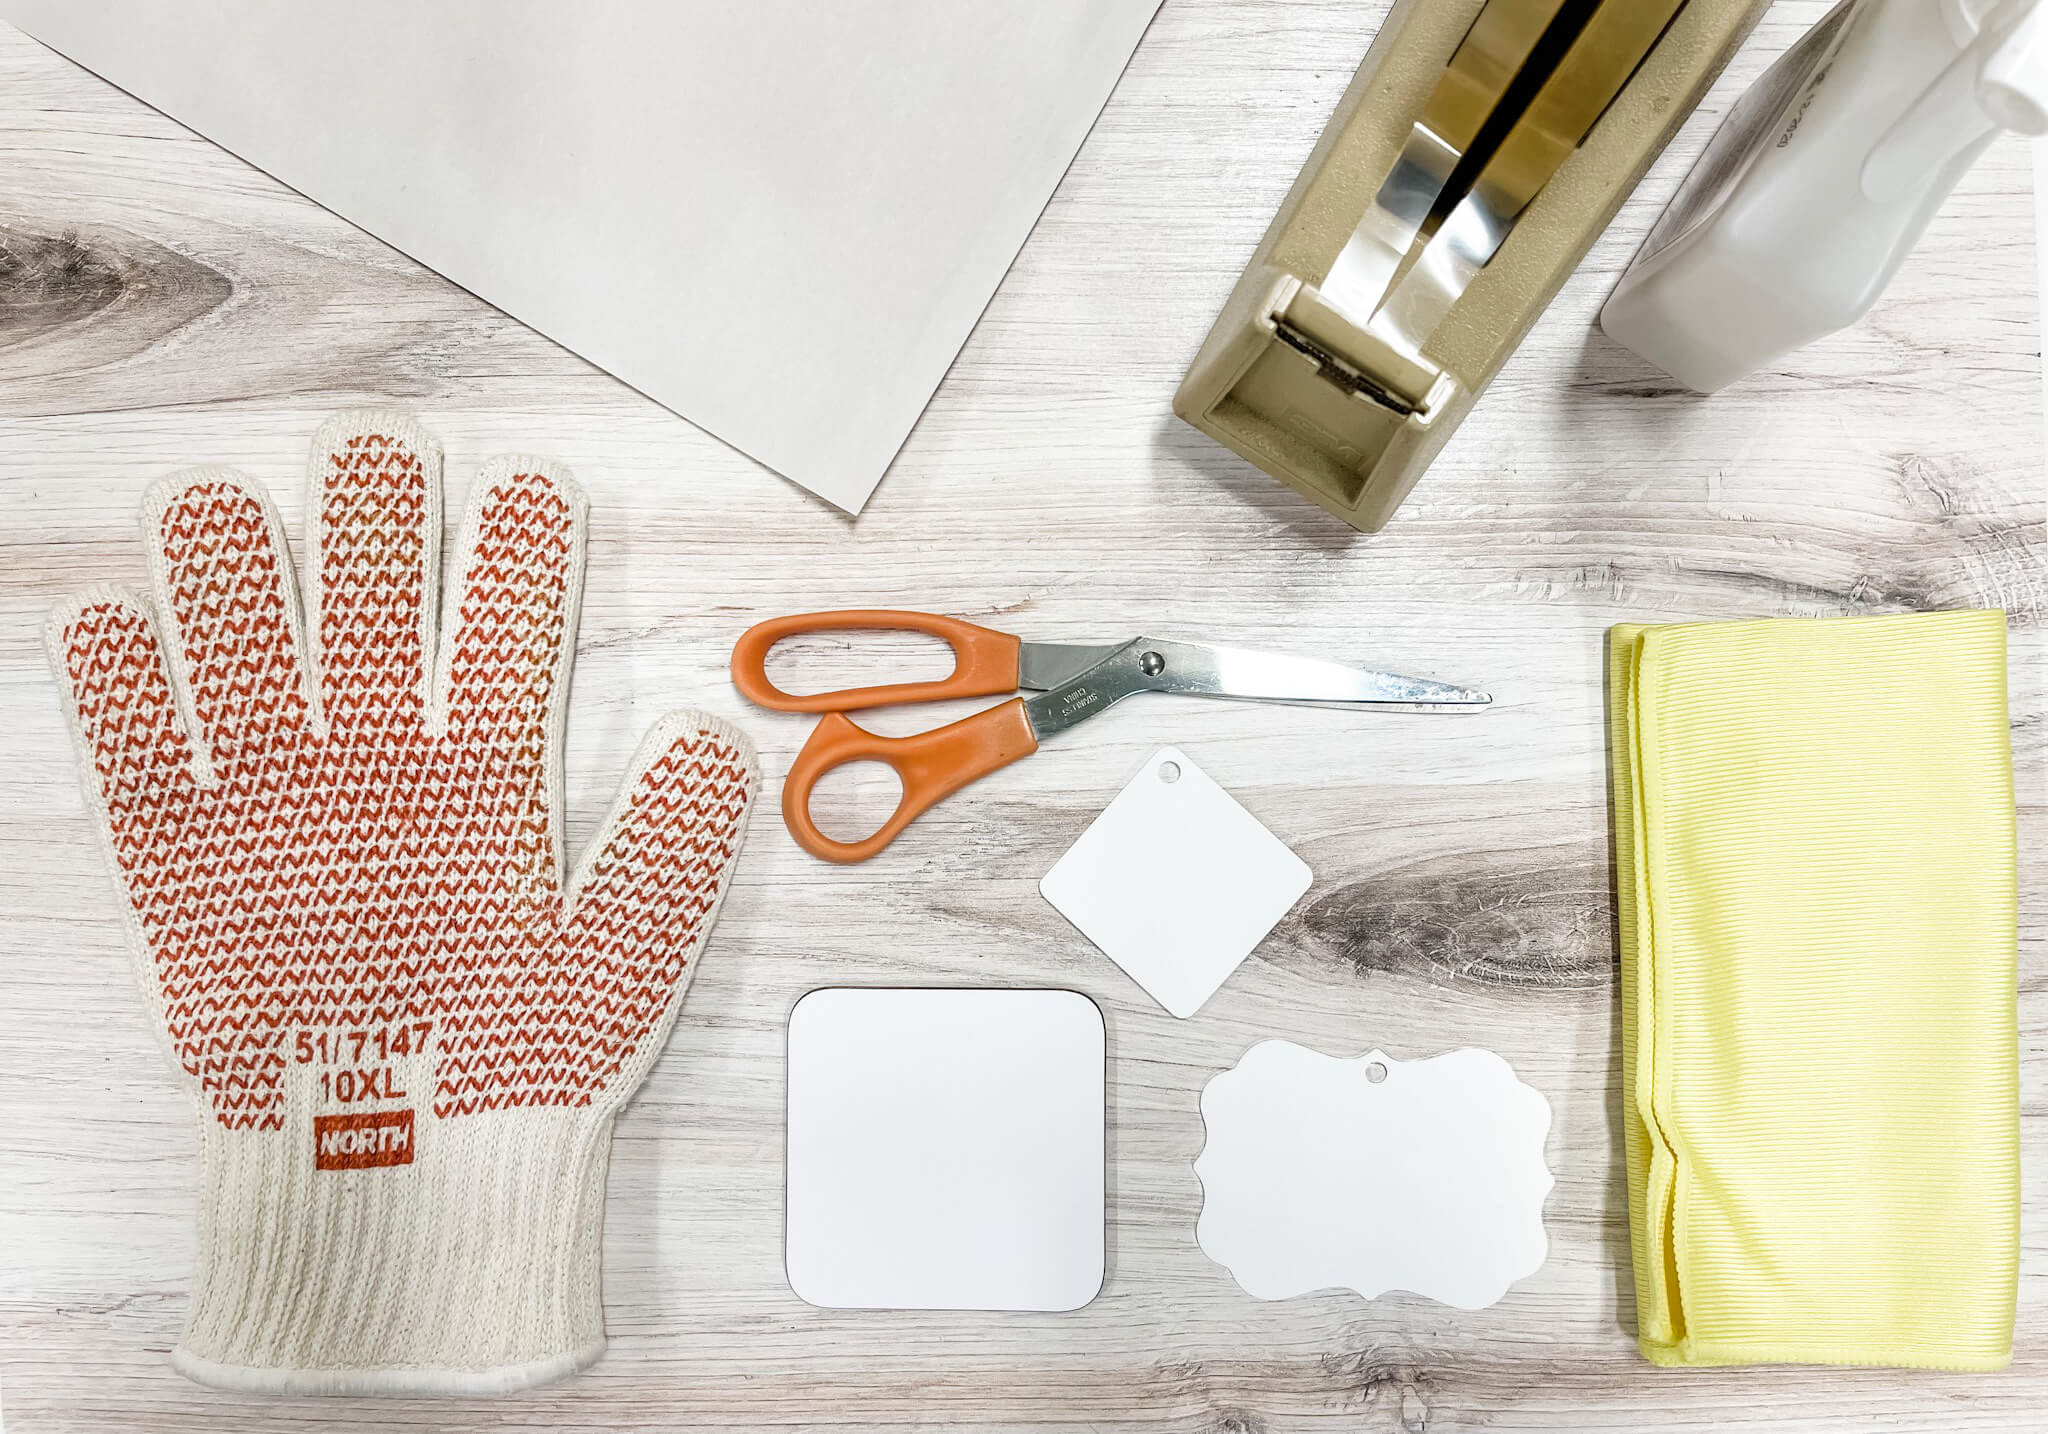 Tools needed for the projects, substrate, printed transfer, heat tape, cleaning cloth, cleaner, heat glove, scissors, and blowout paper